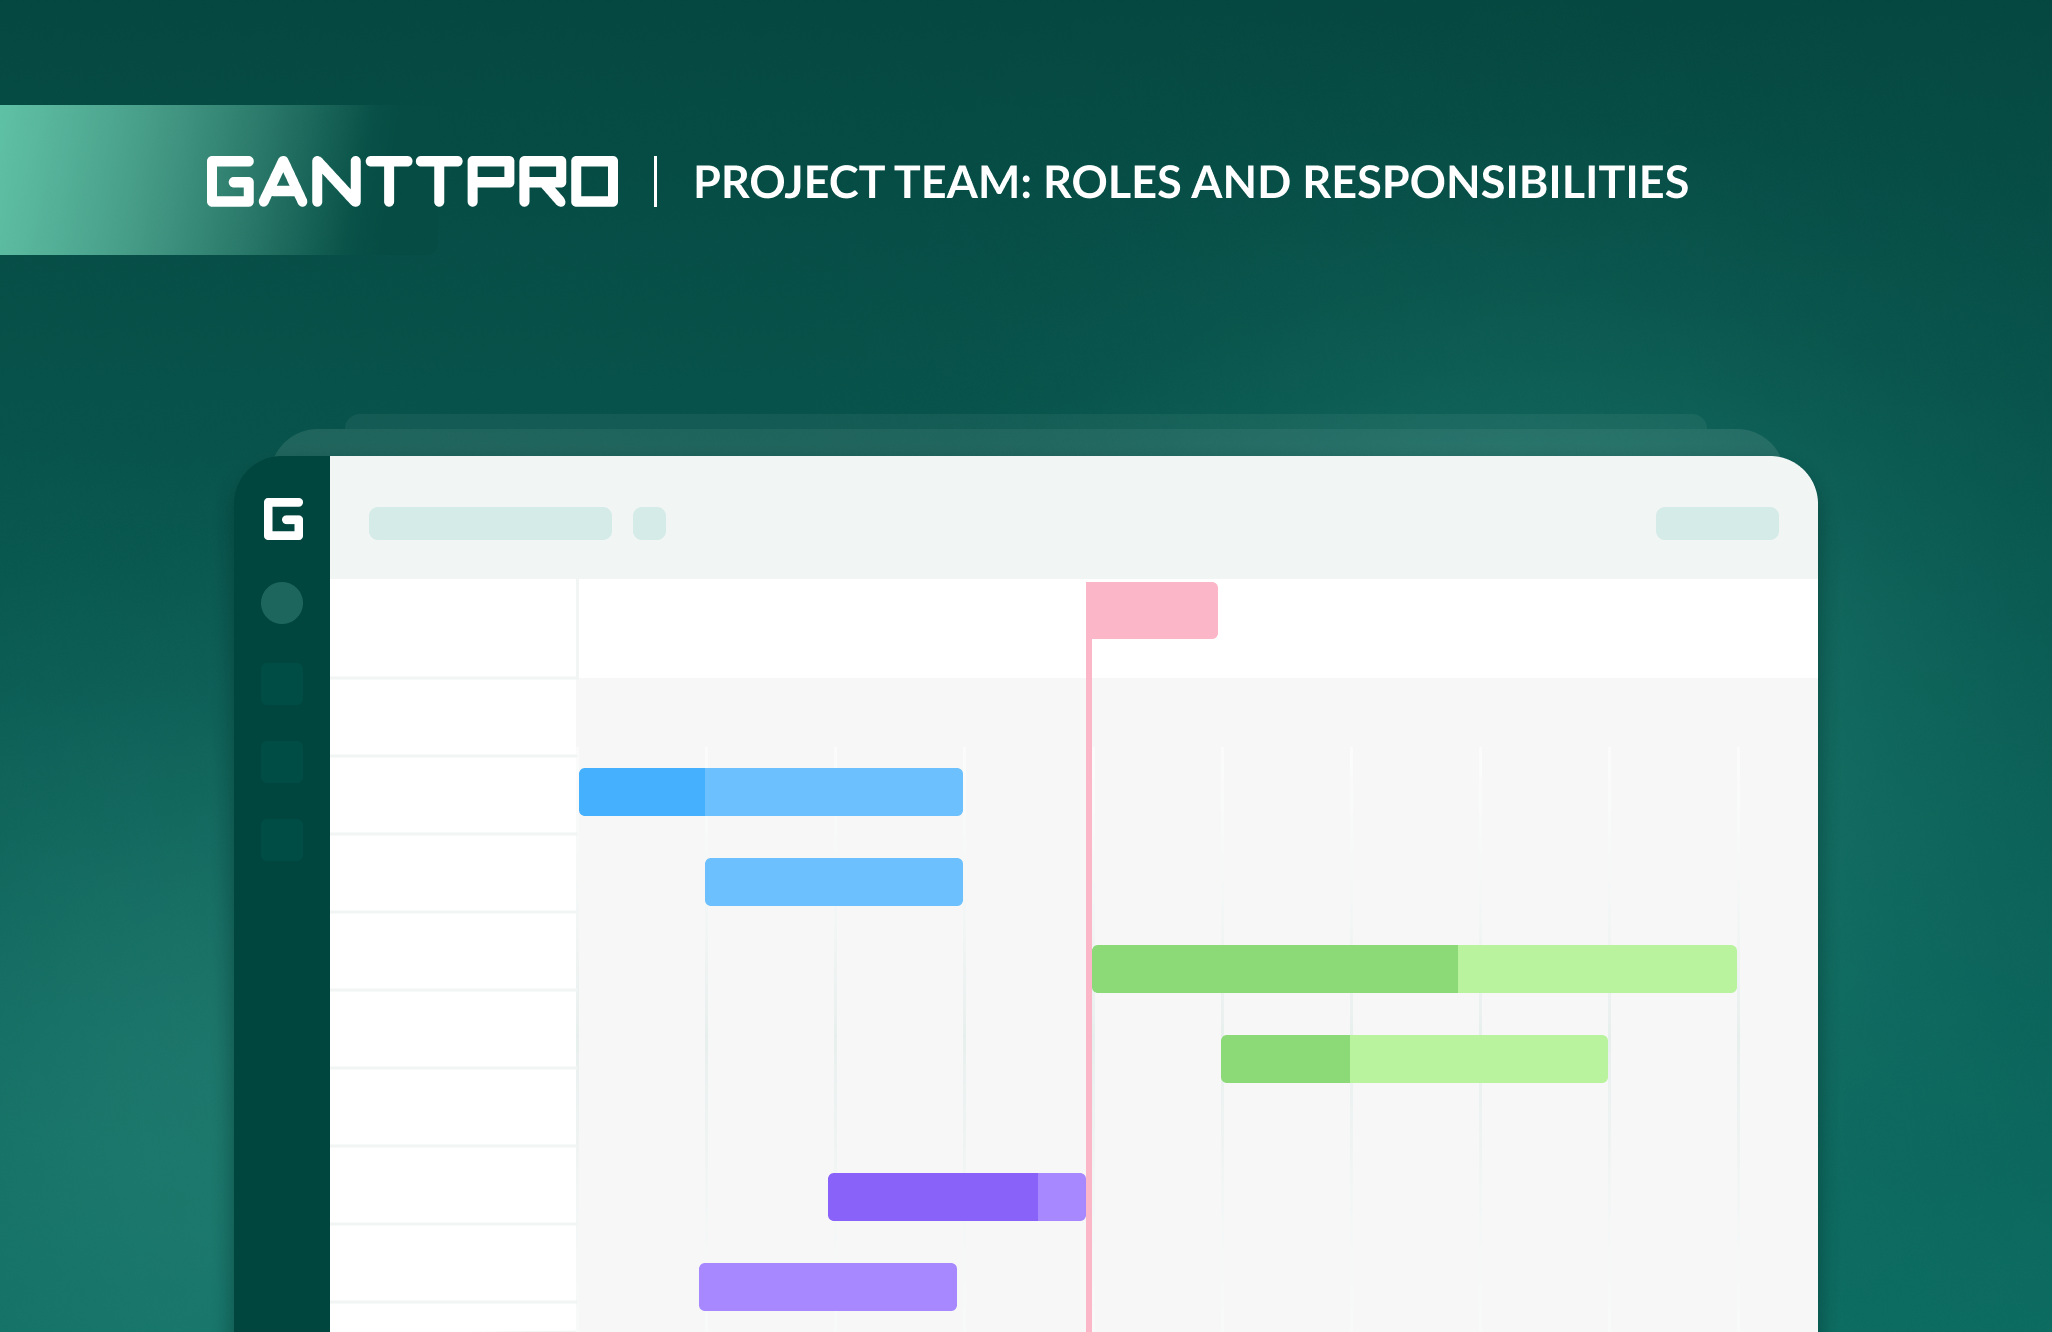 Roles and responsibilities of a project team